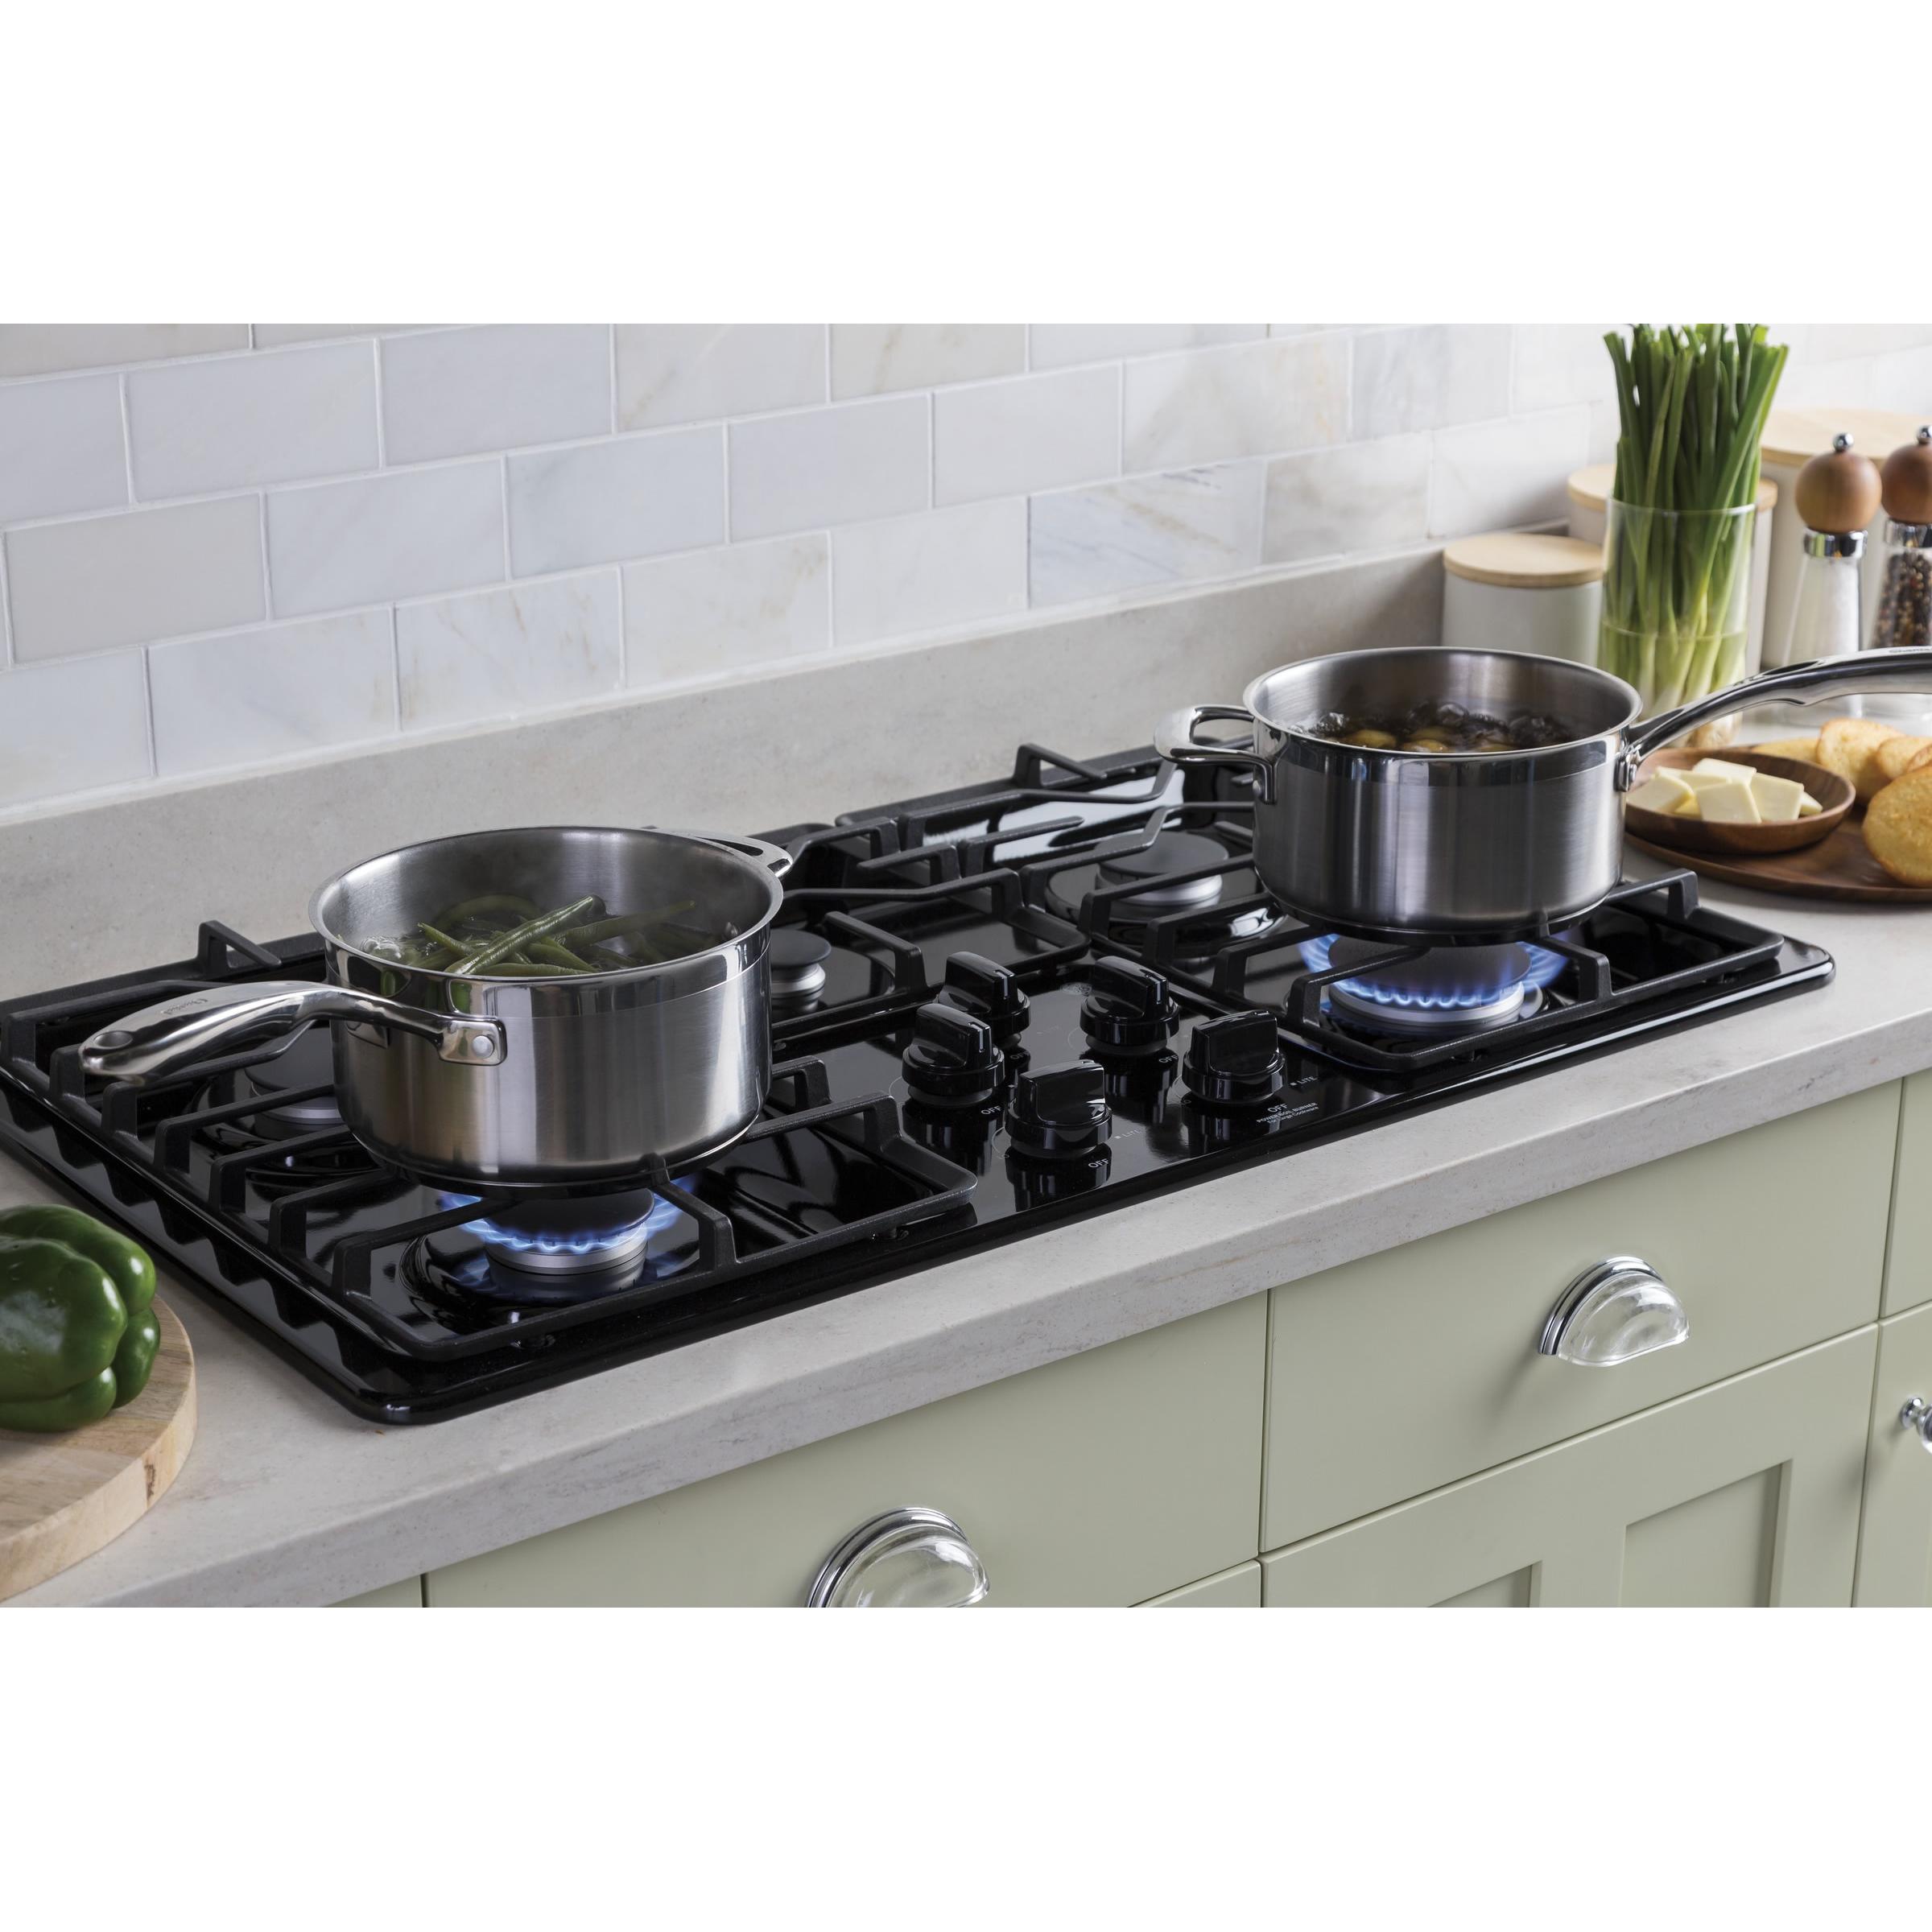 GE 36-inch Built-In Gas Cooktop with MAX Burner System JGP3036DLBB